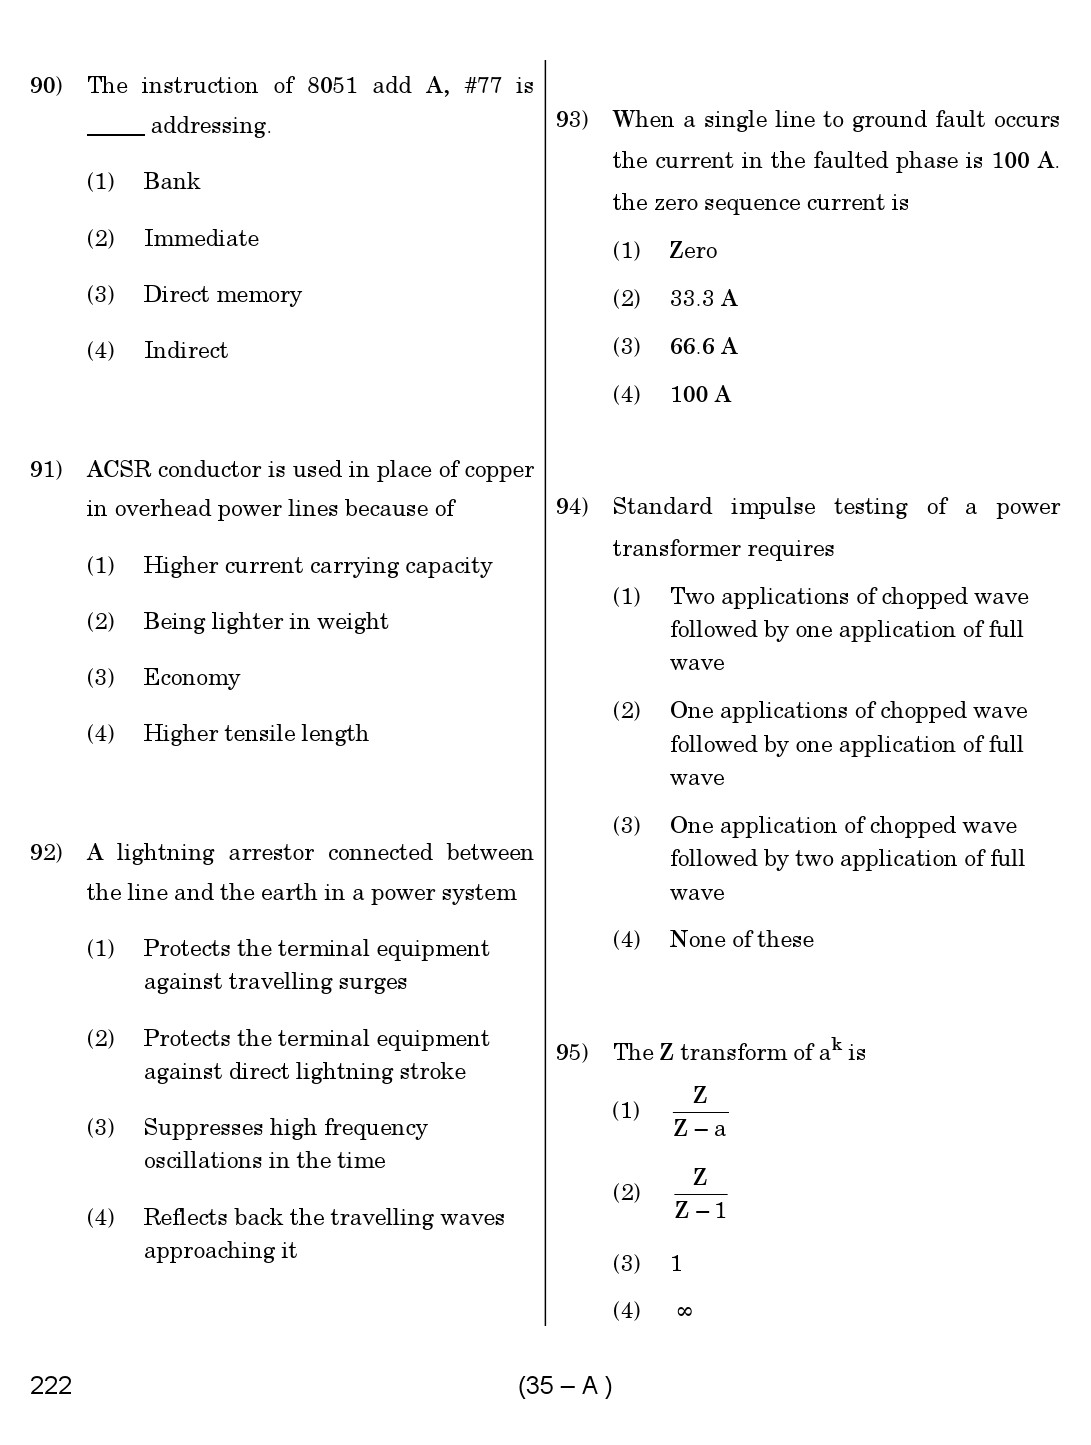 Karnataka PSC Assistant Engineer Electrical Exam Sample Question Paper 35